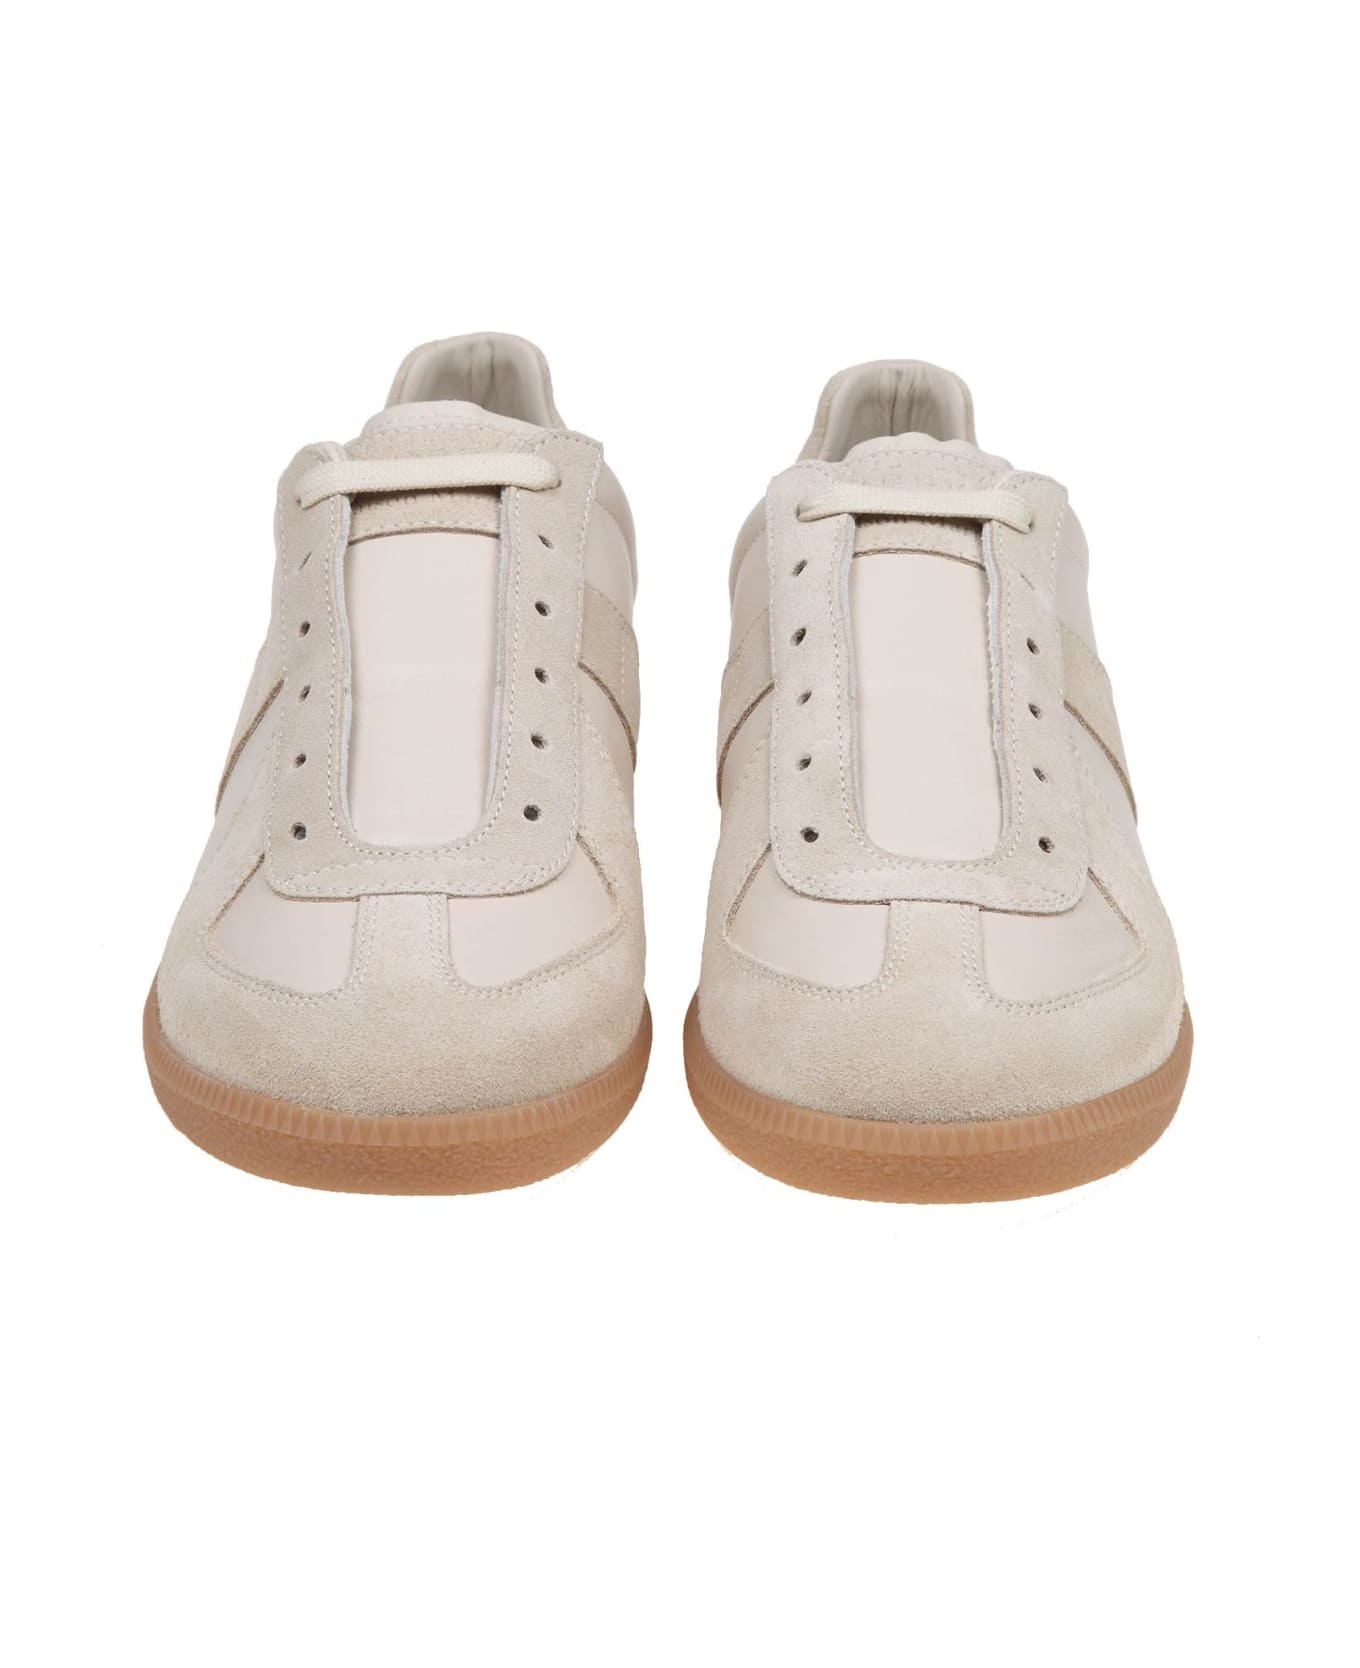 Replica Sneakers In Leather And Suede - 3